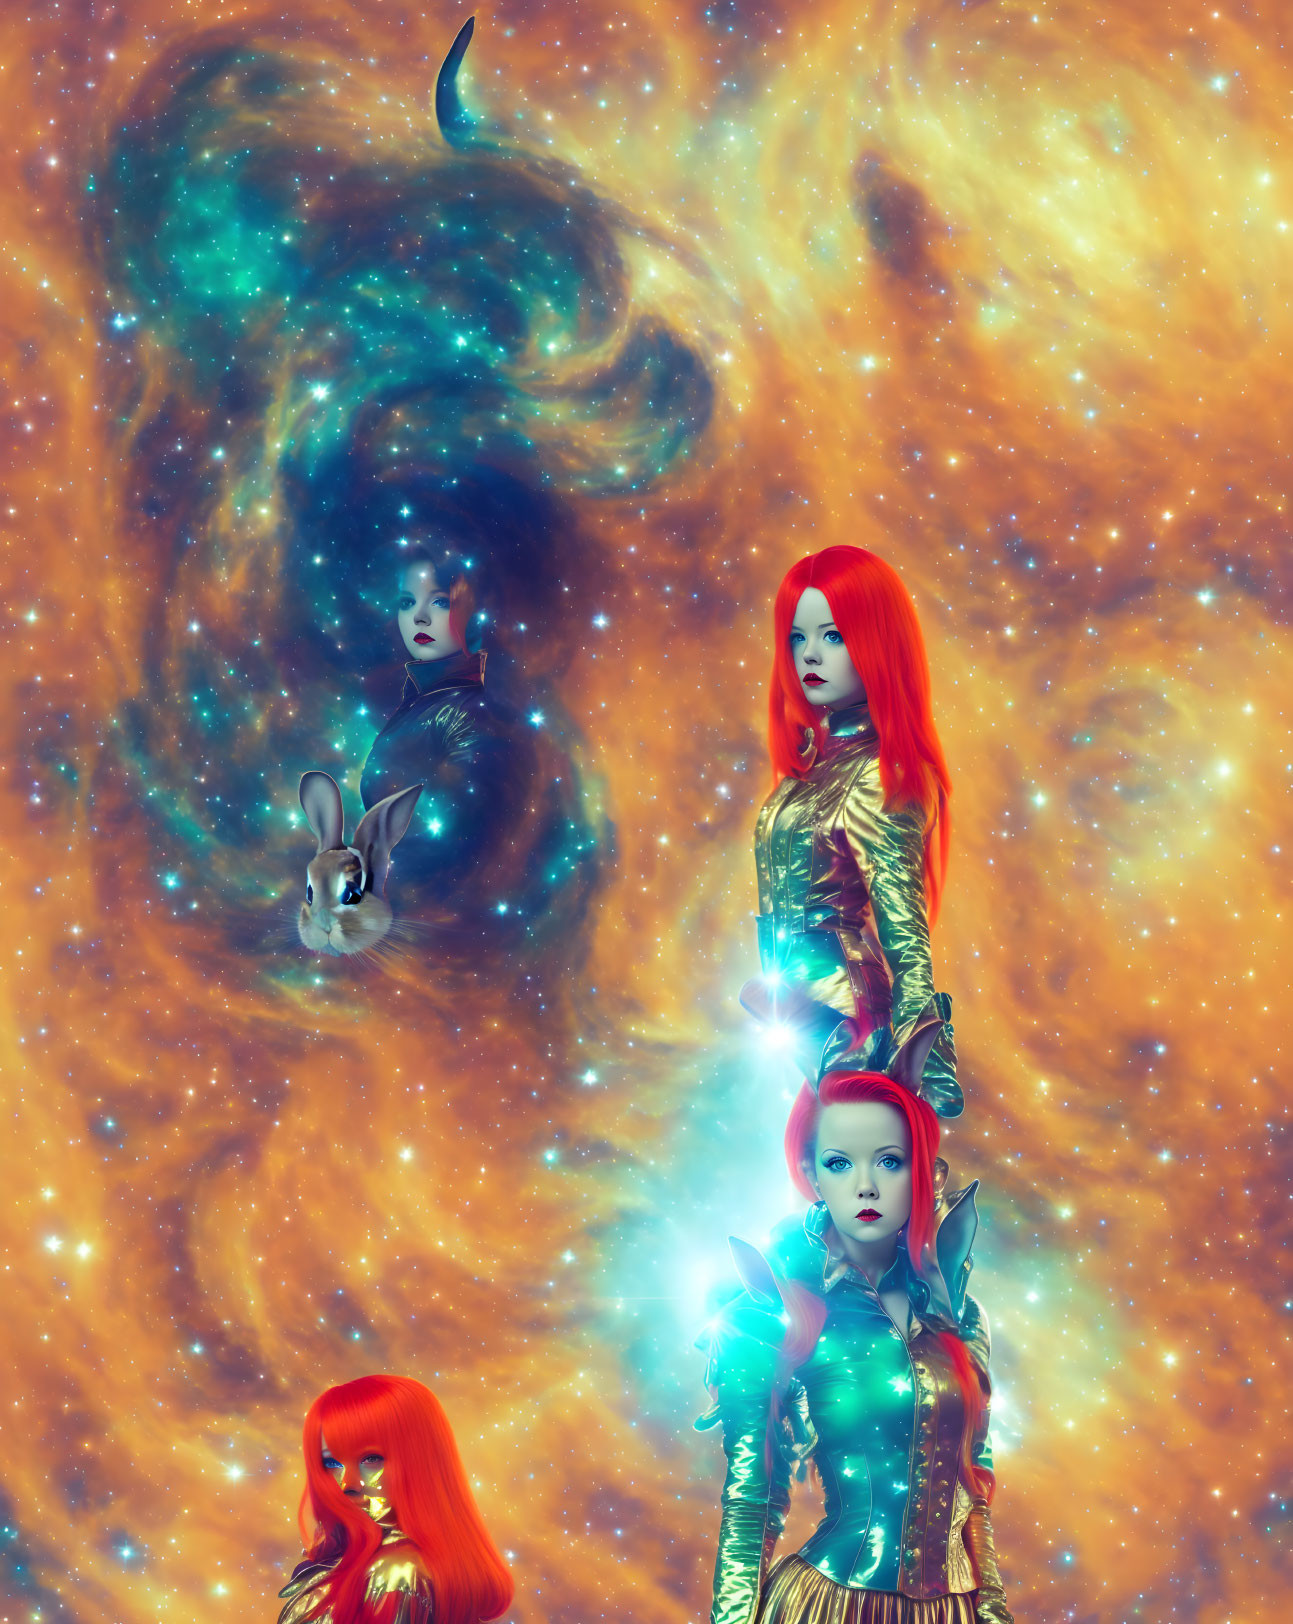 Colorful cosmic artwork with red-haired woman and glowing orb in futuristic attire